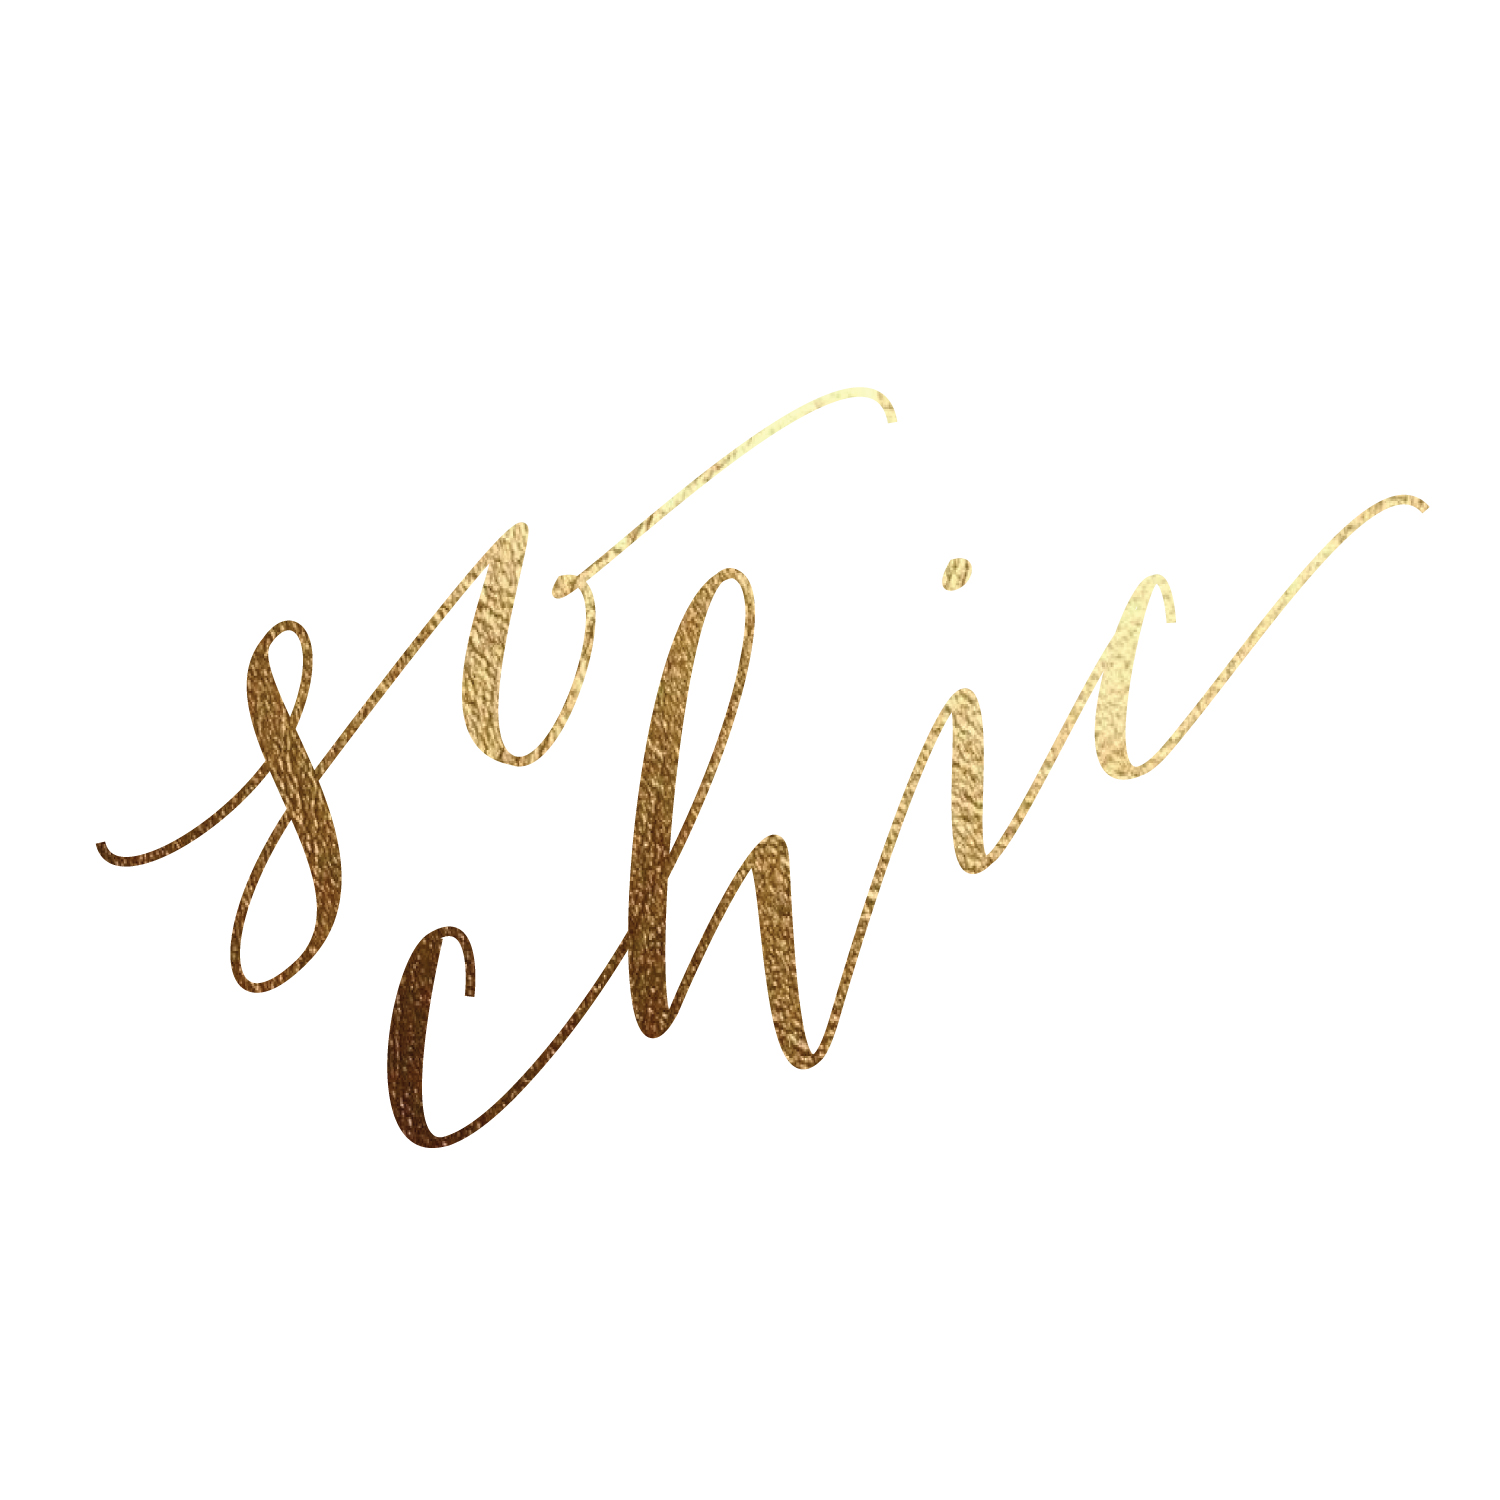 Our Gorgeous New Look! - Ever So Chic : Ever So Chic